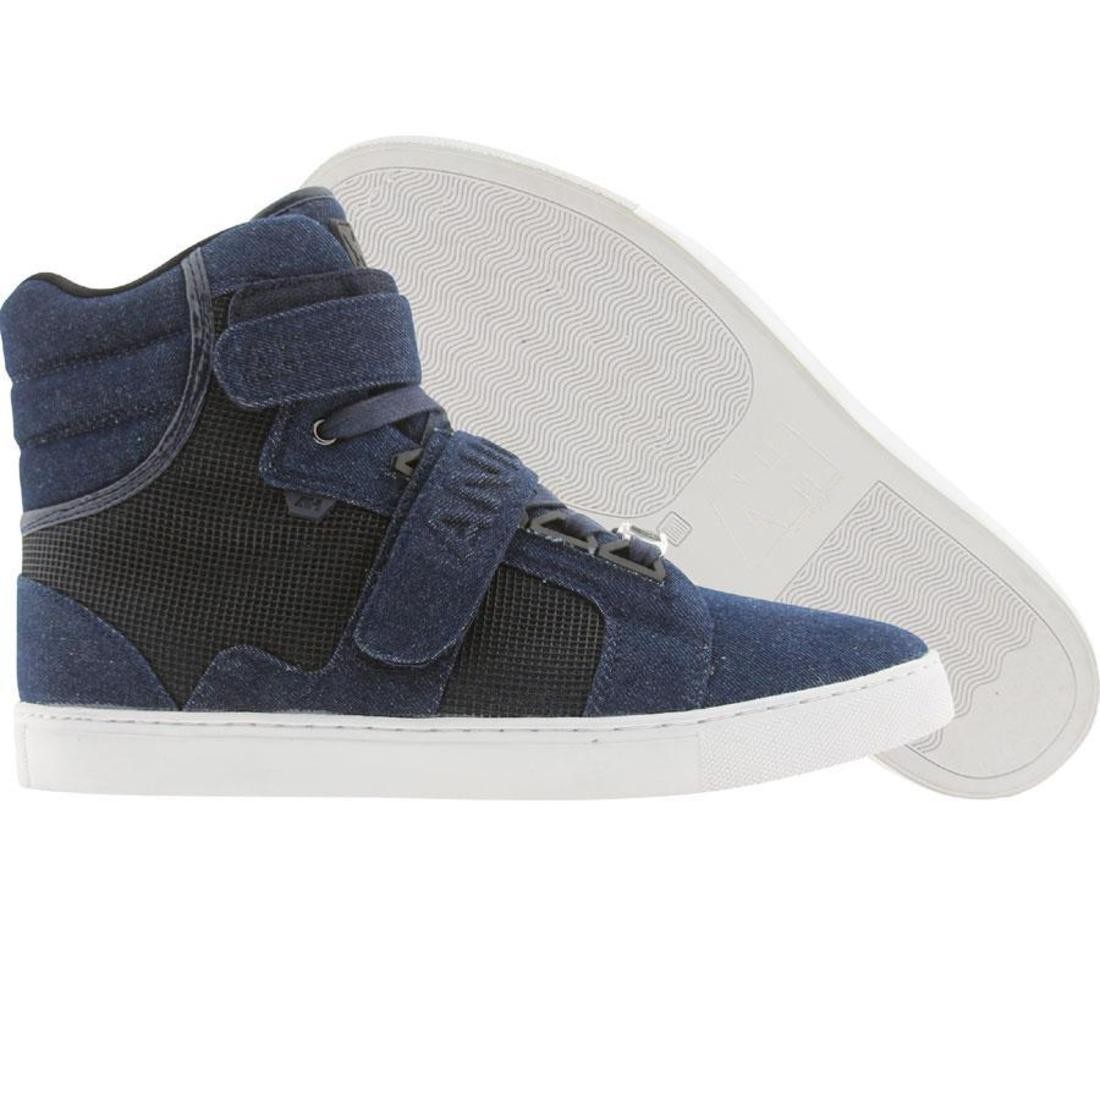 AH By Android Homme Propulsion High (blue)